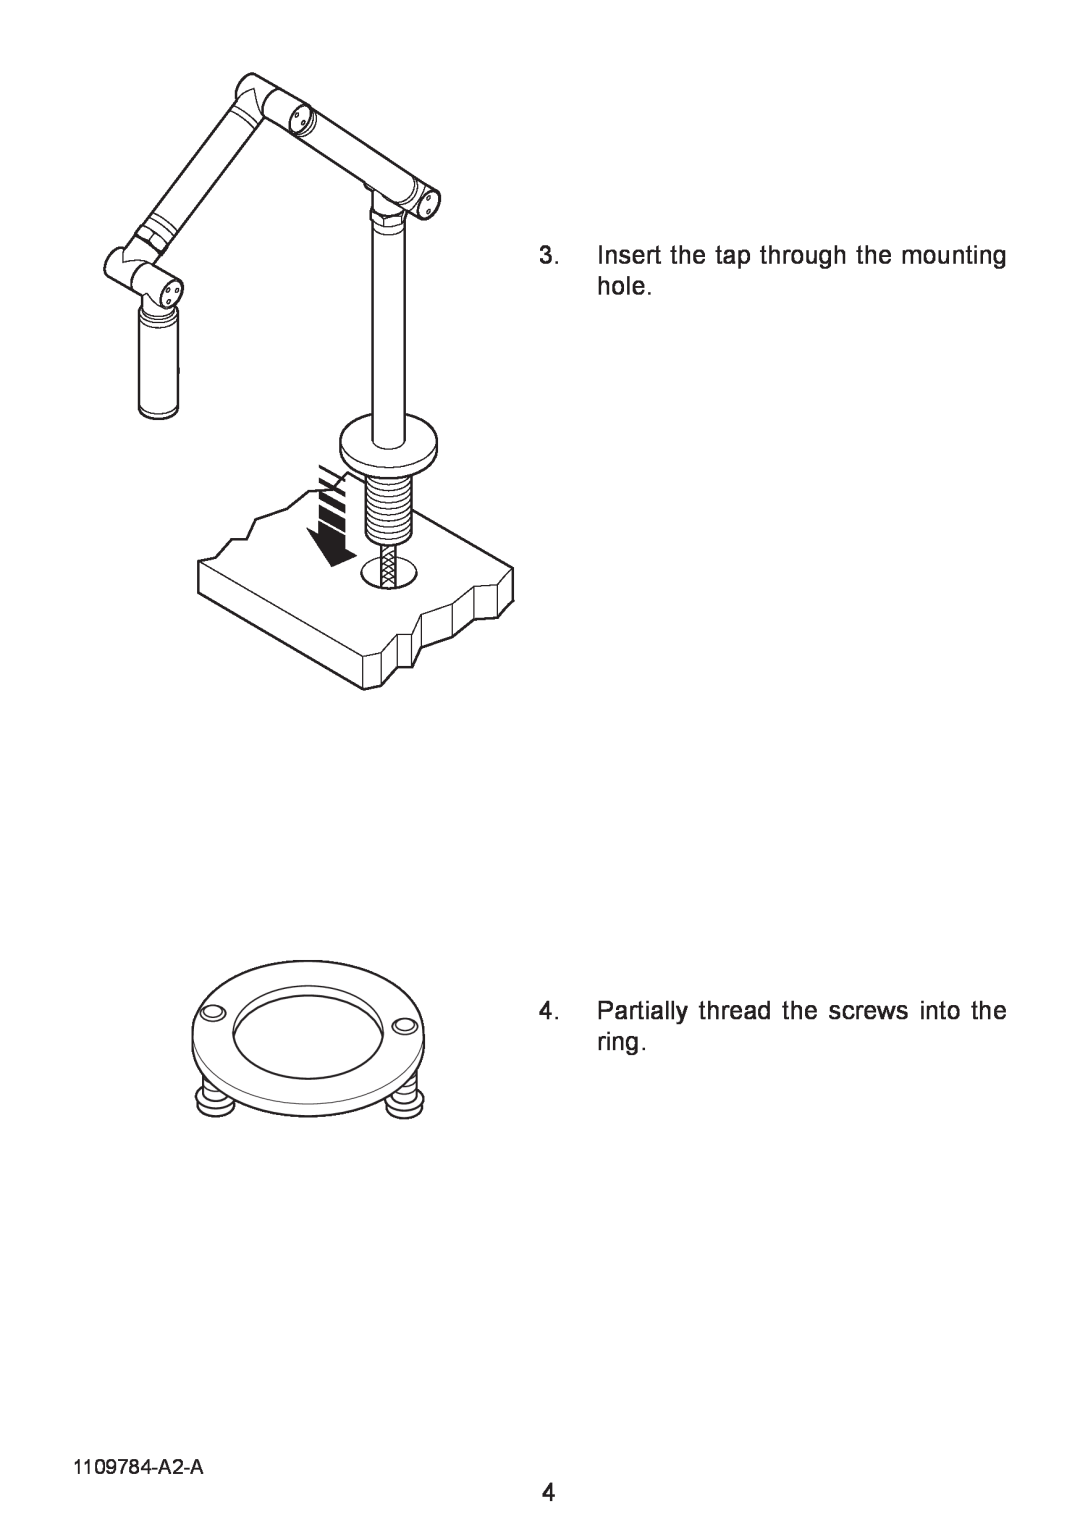 Kohler K-6227A manual Insert the tap through the mounting hole, Partially thread the screws into the ring, 1109784-A2-A 